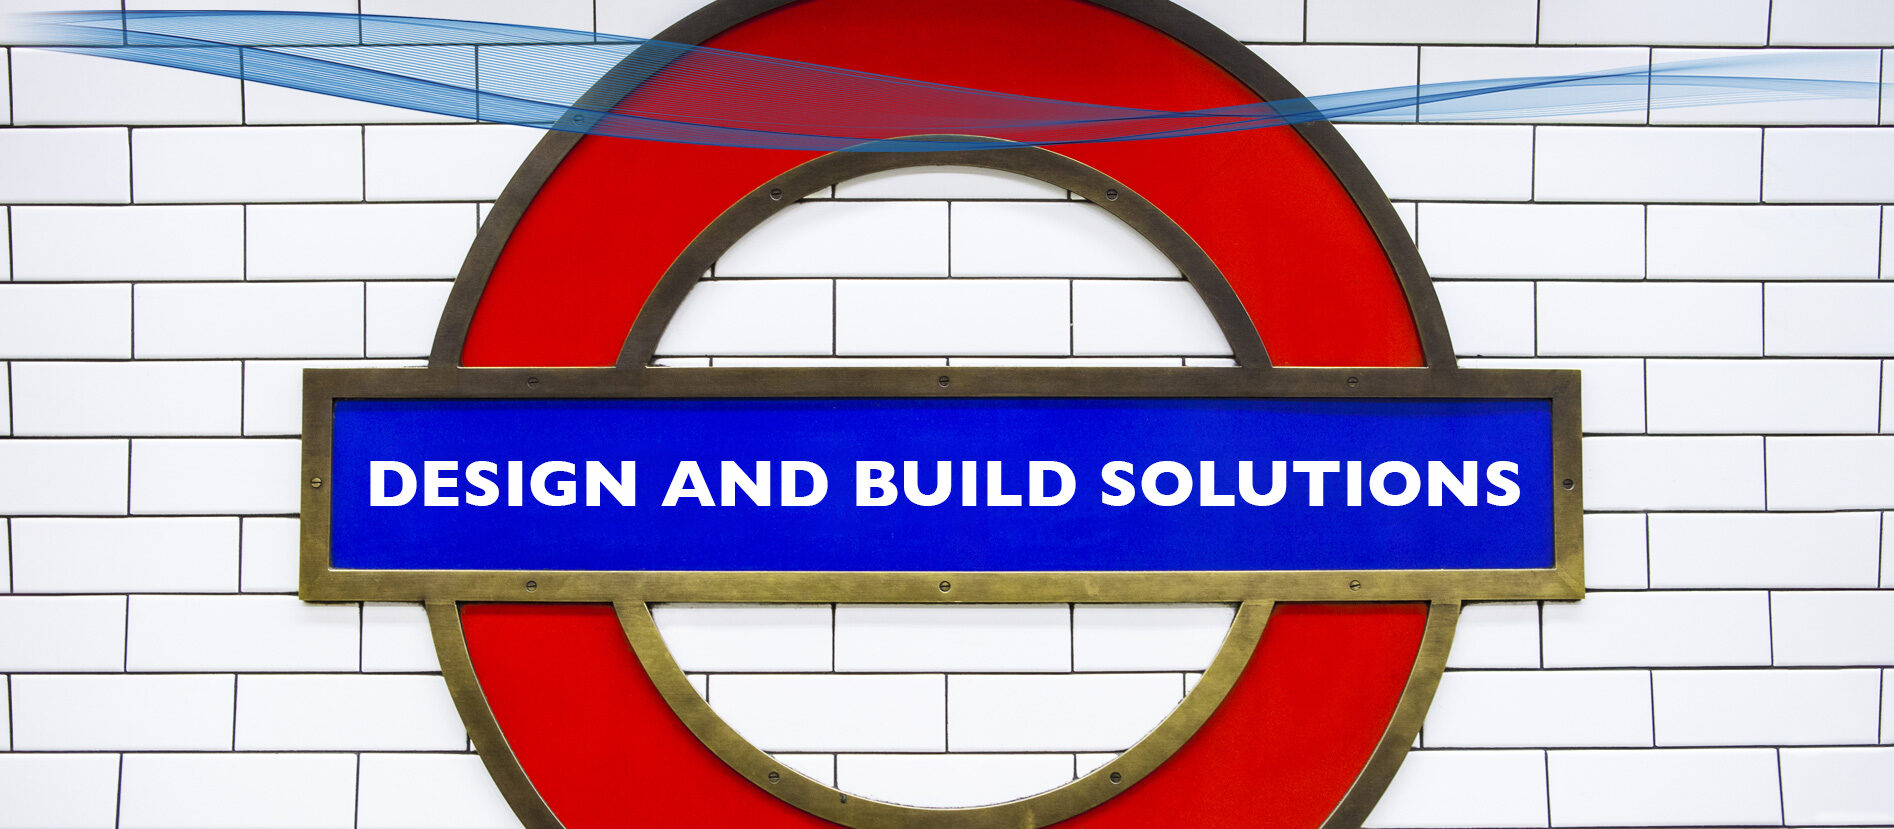 DESIGN AND BUILD SOLUTIONS